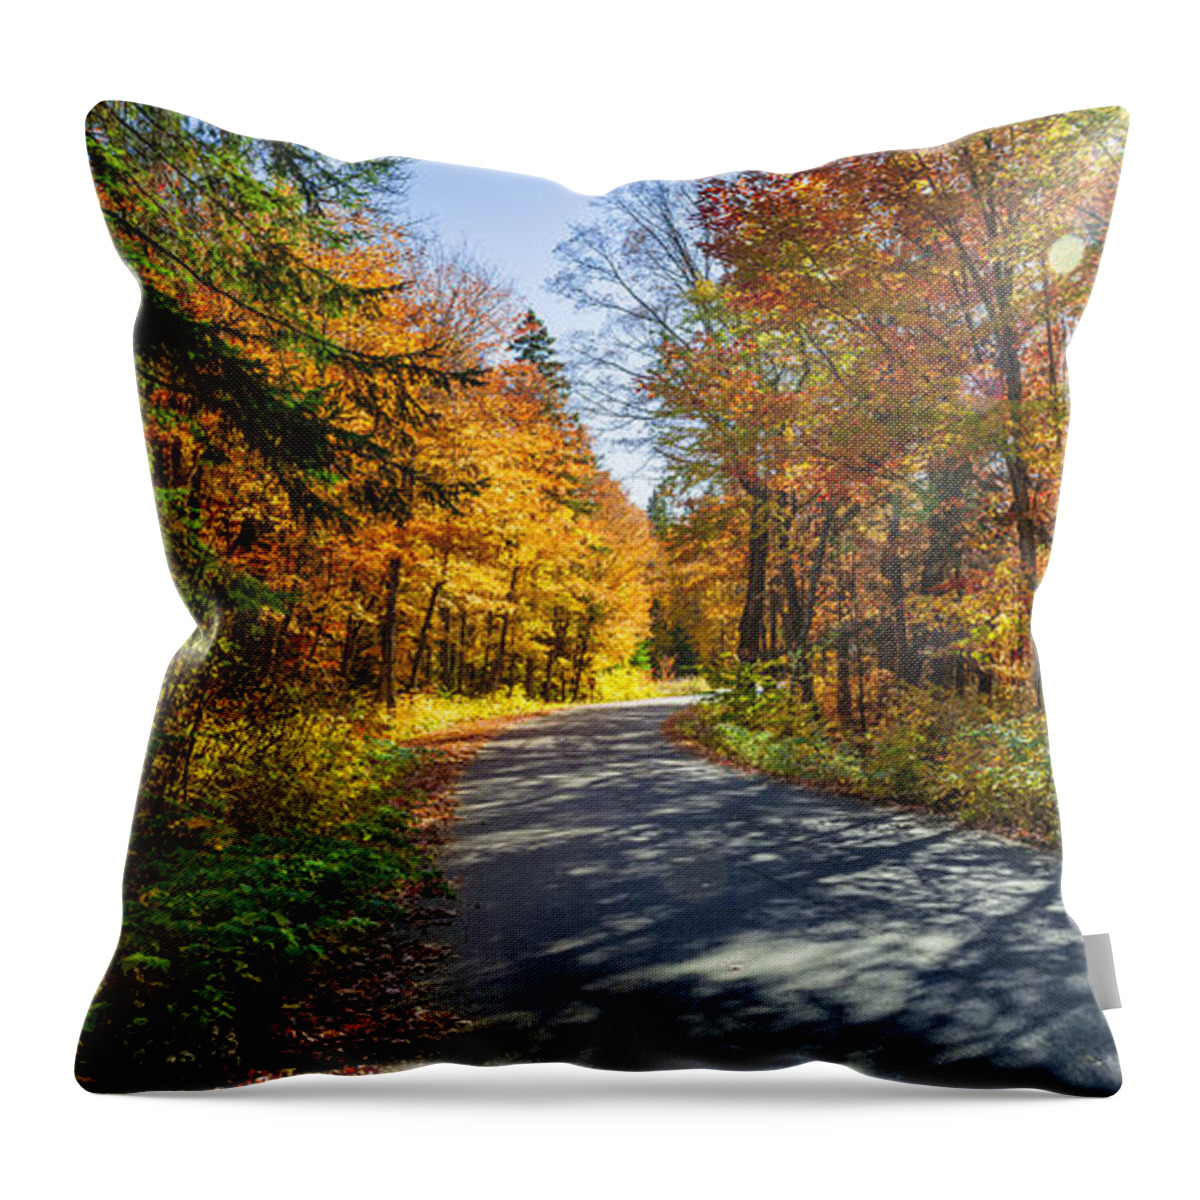 Road Throw Pillow featuring the photograph Road through fall forest by Elena Elisseeva